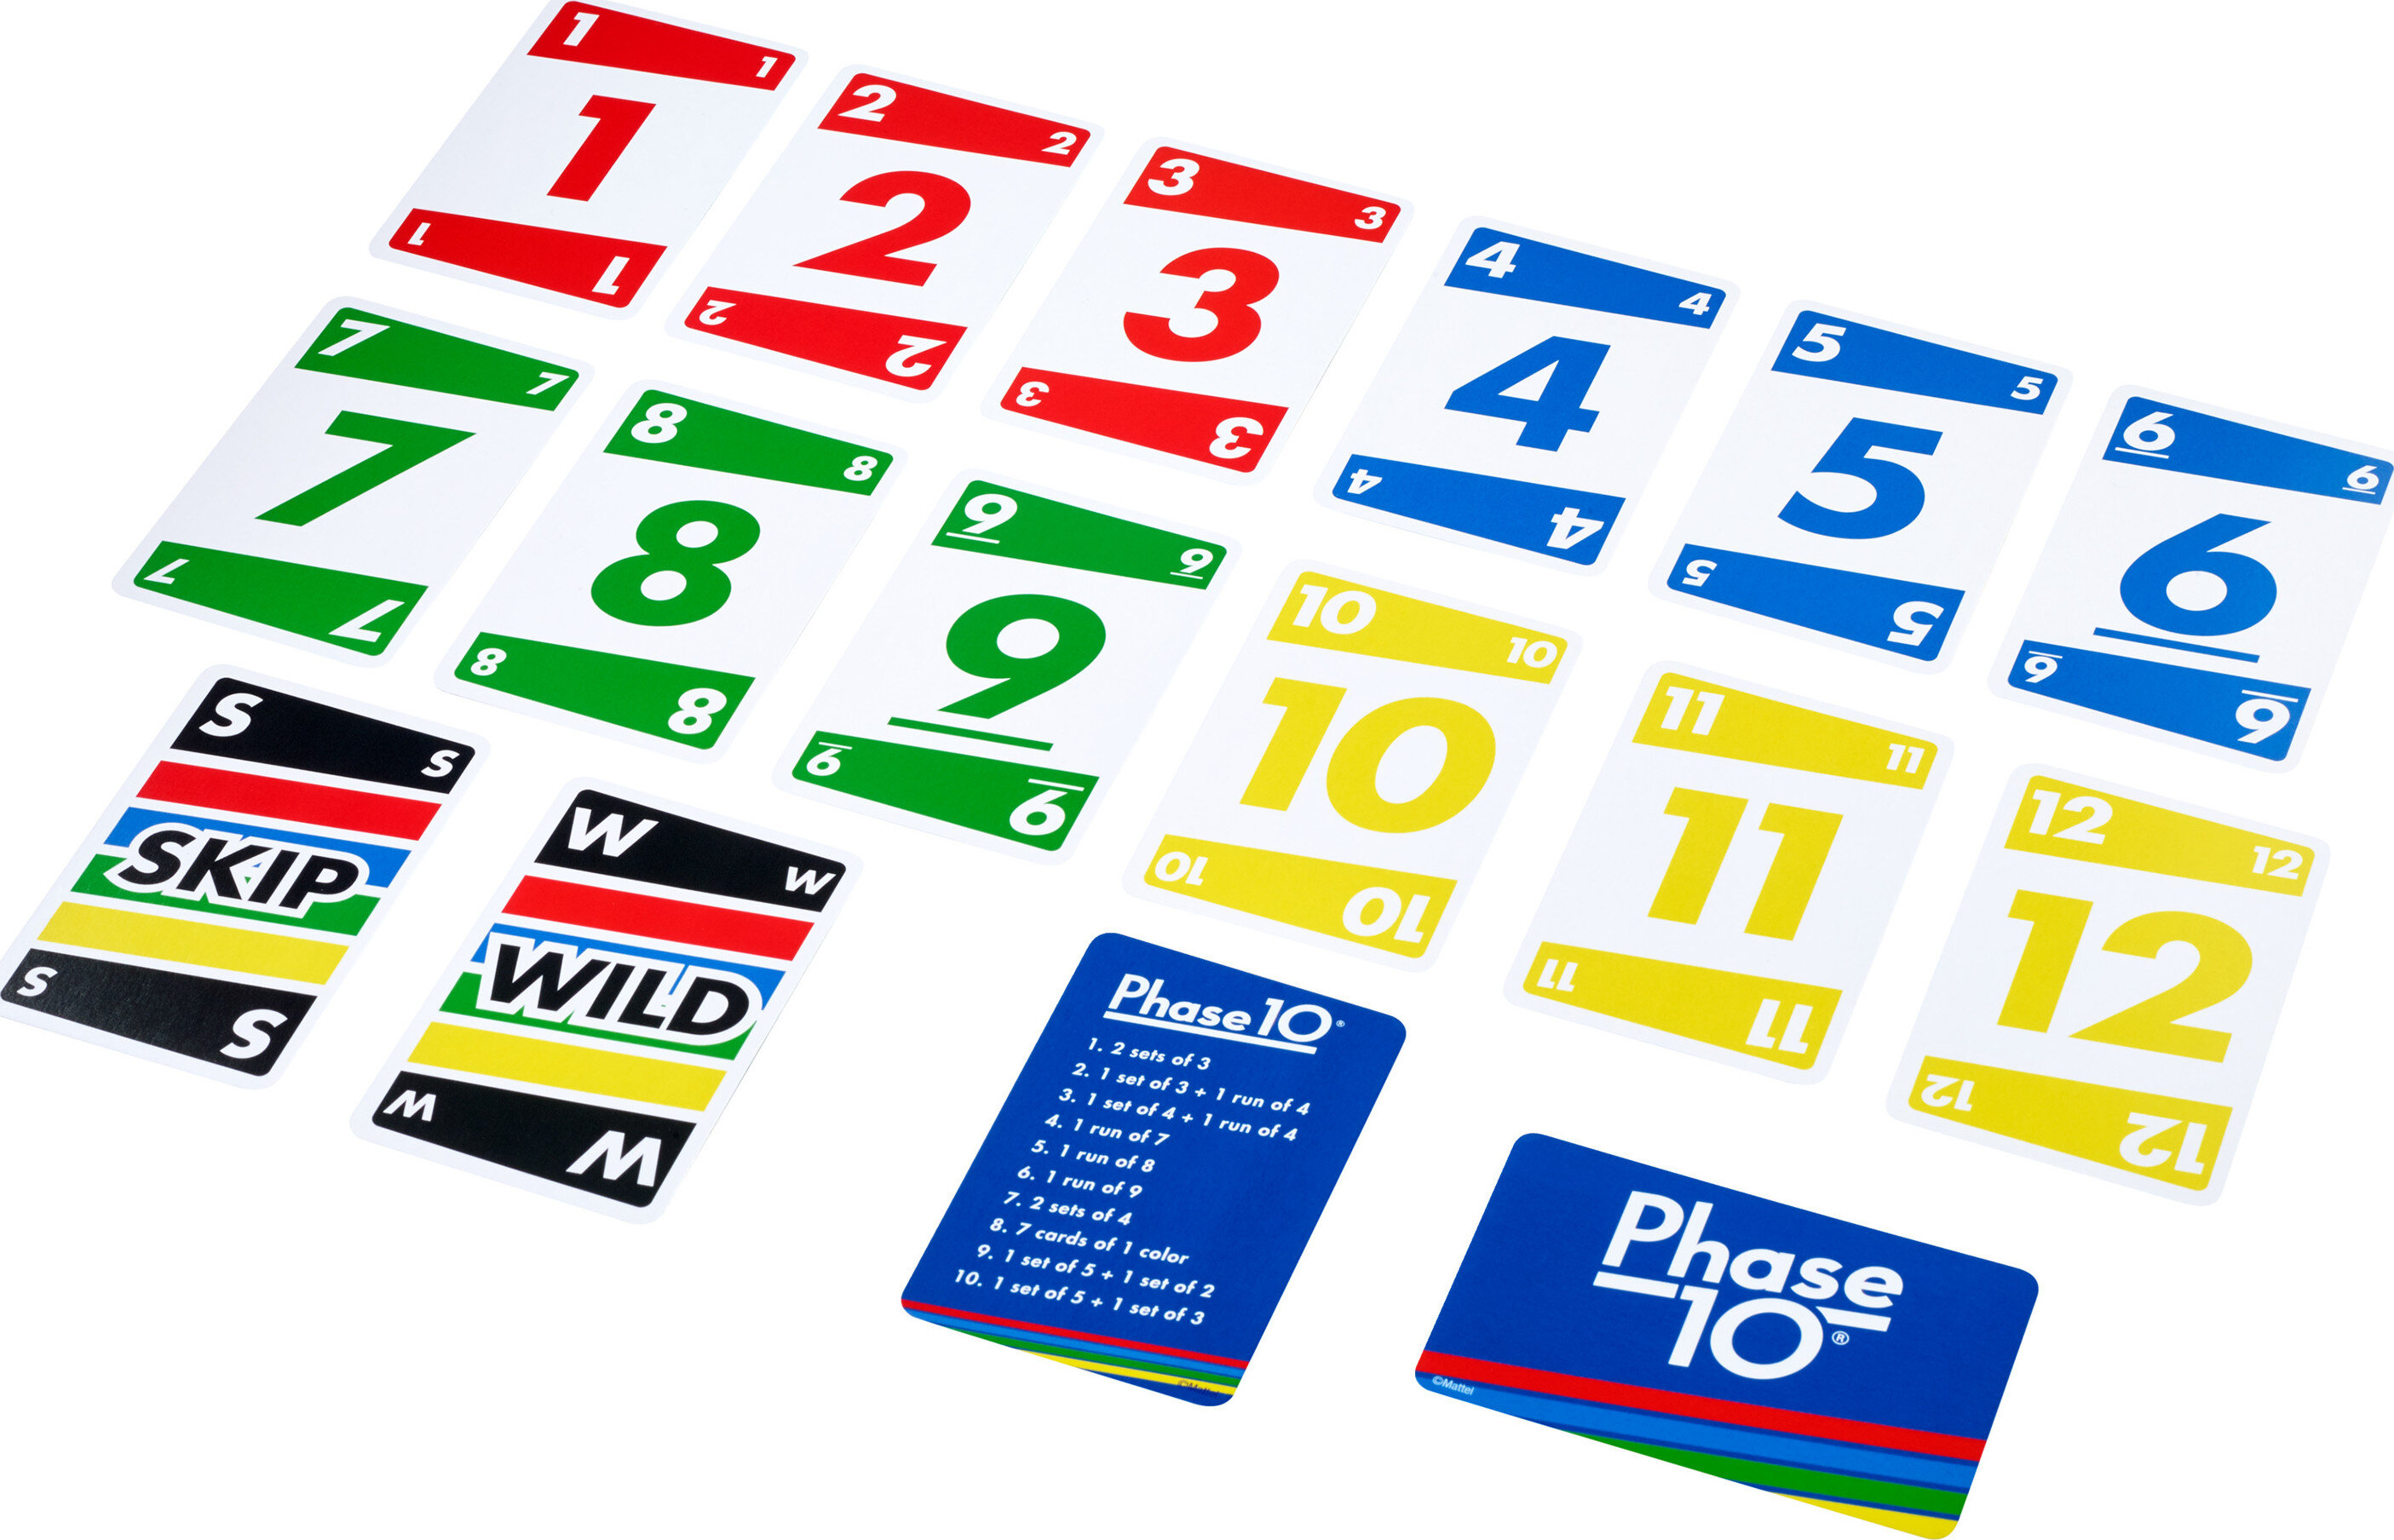 Phase 10 Card Game, Family Game for Adults & Kids, Challenging & Exciting Rummy-Style Play - image 5 of 7